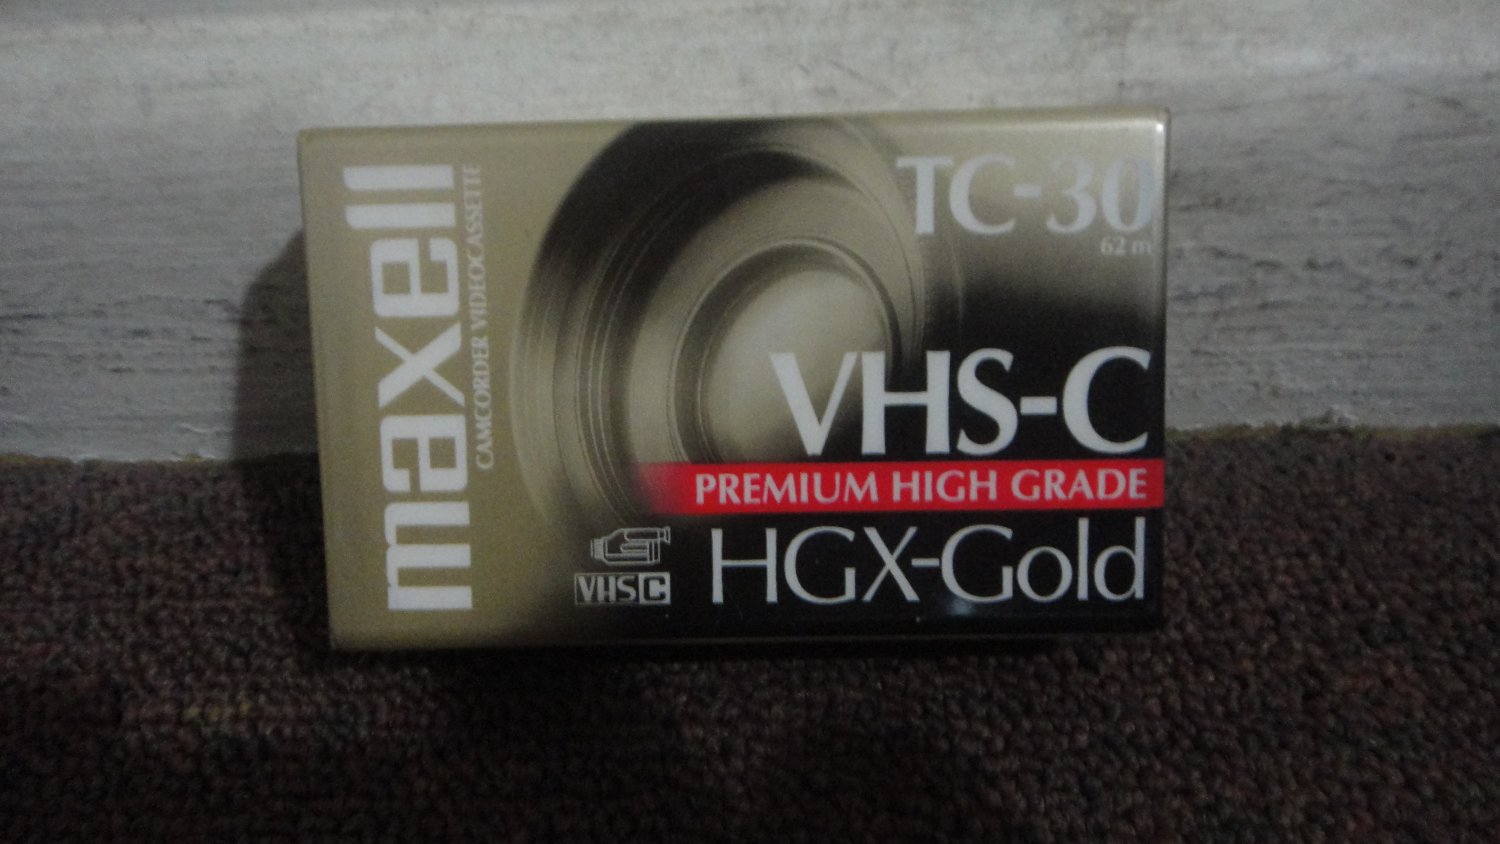 Maxell Camcorder Videocassette TC-30 62m VHS-C HGX-GOLD NEW & Sealed..LooK!